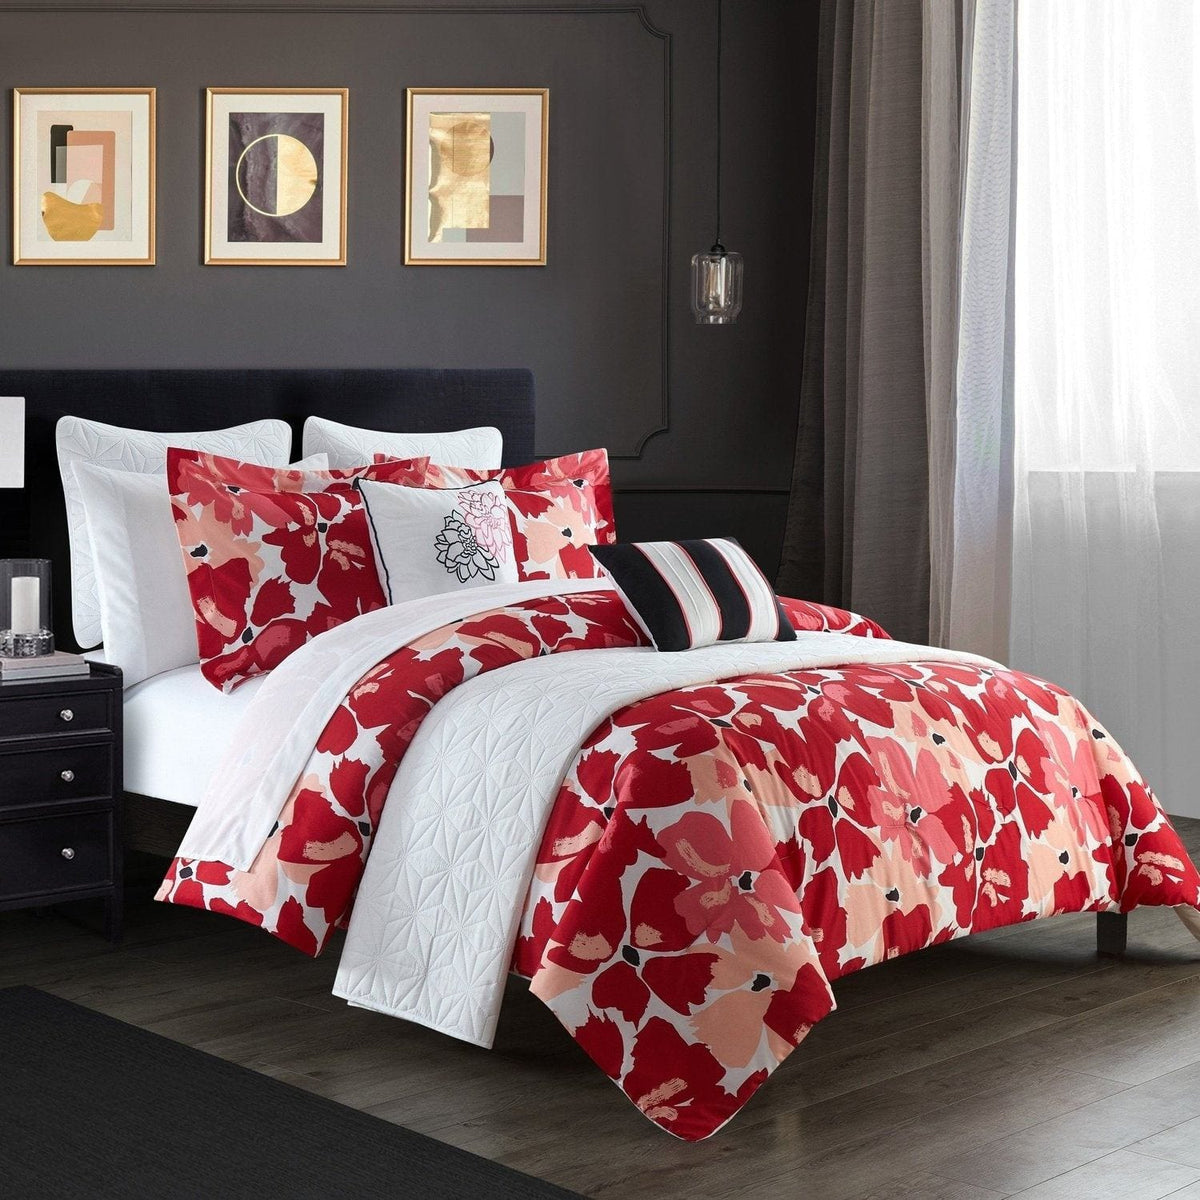 Chic Home Malea 12 Piece Floral Comforter and Quilt Set 